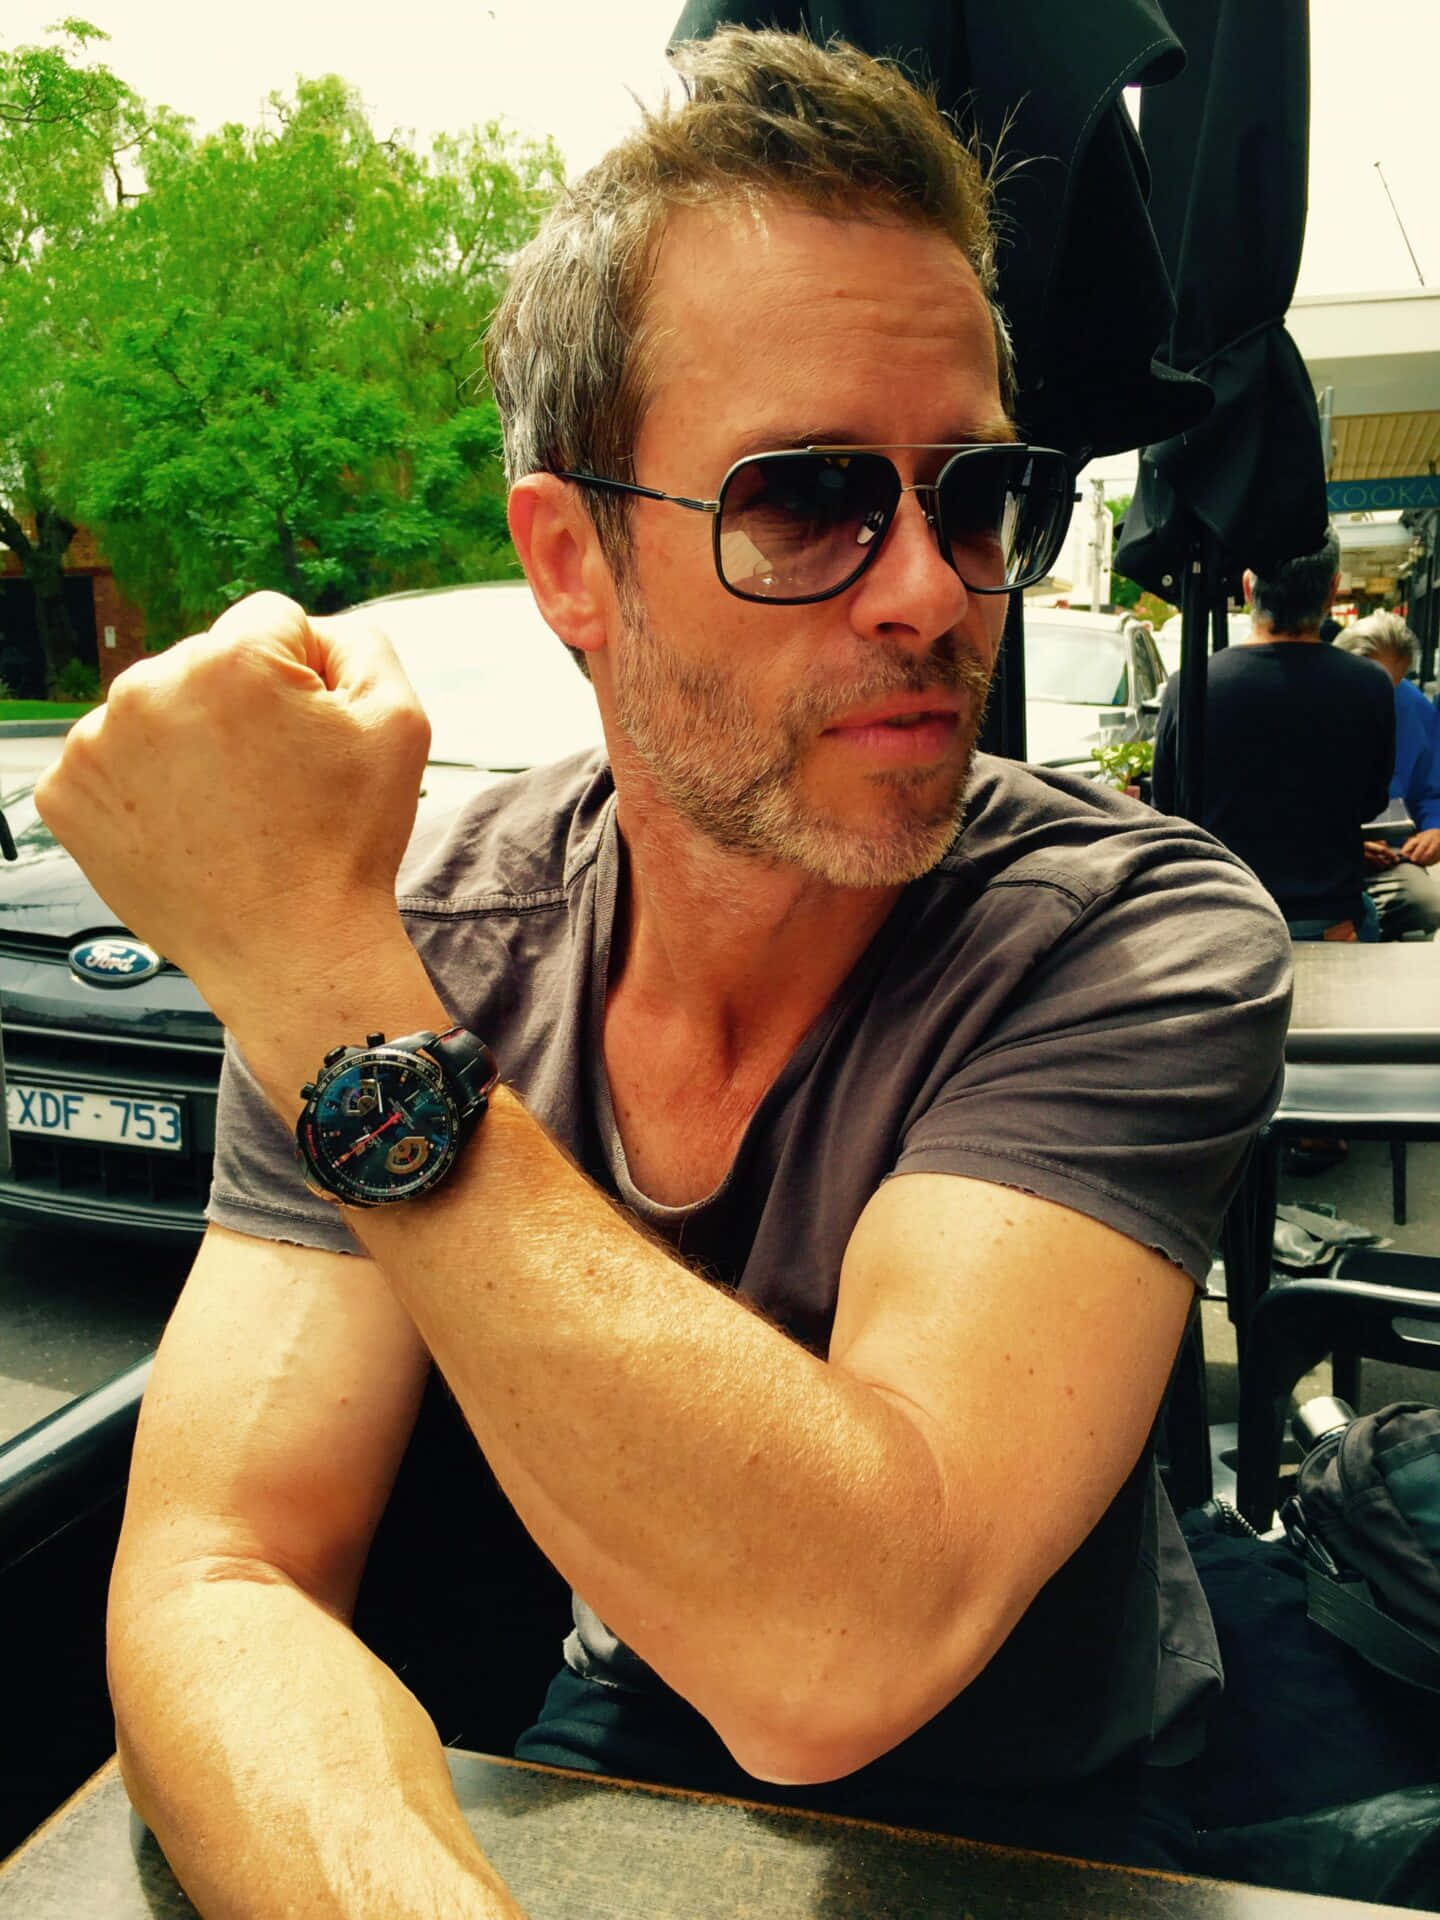 Guypearce Is An English Actor Known For His Roles In Films Such As 